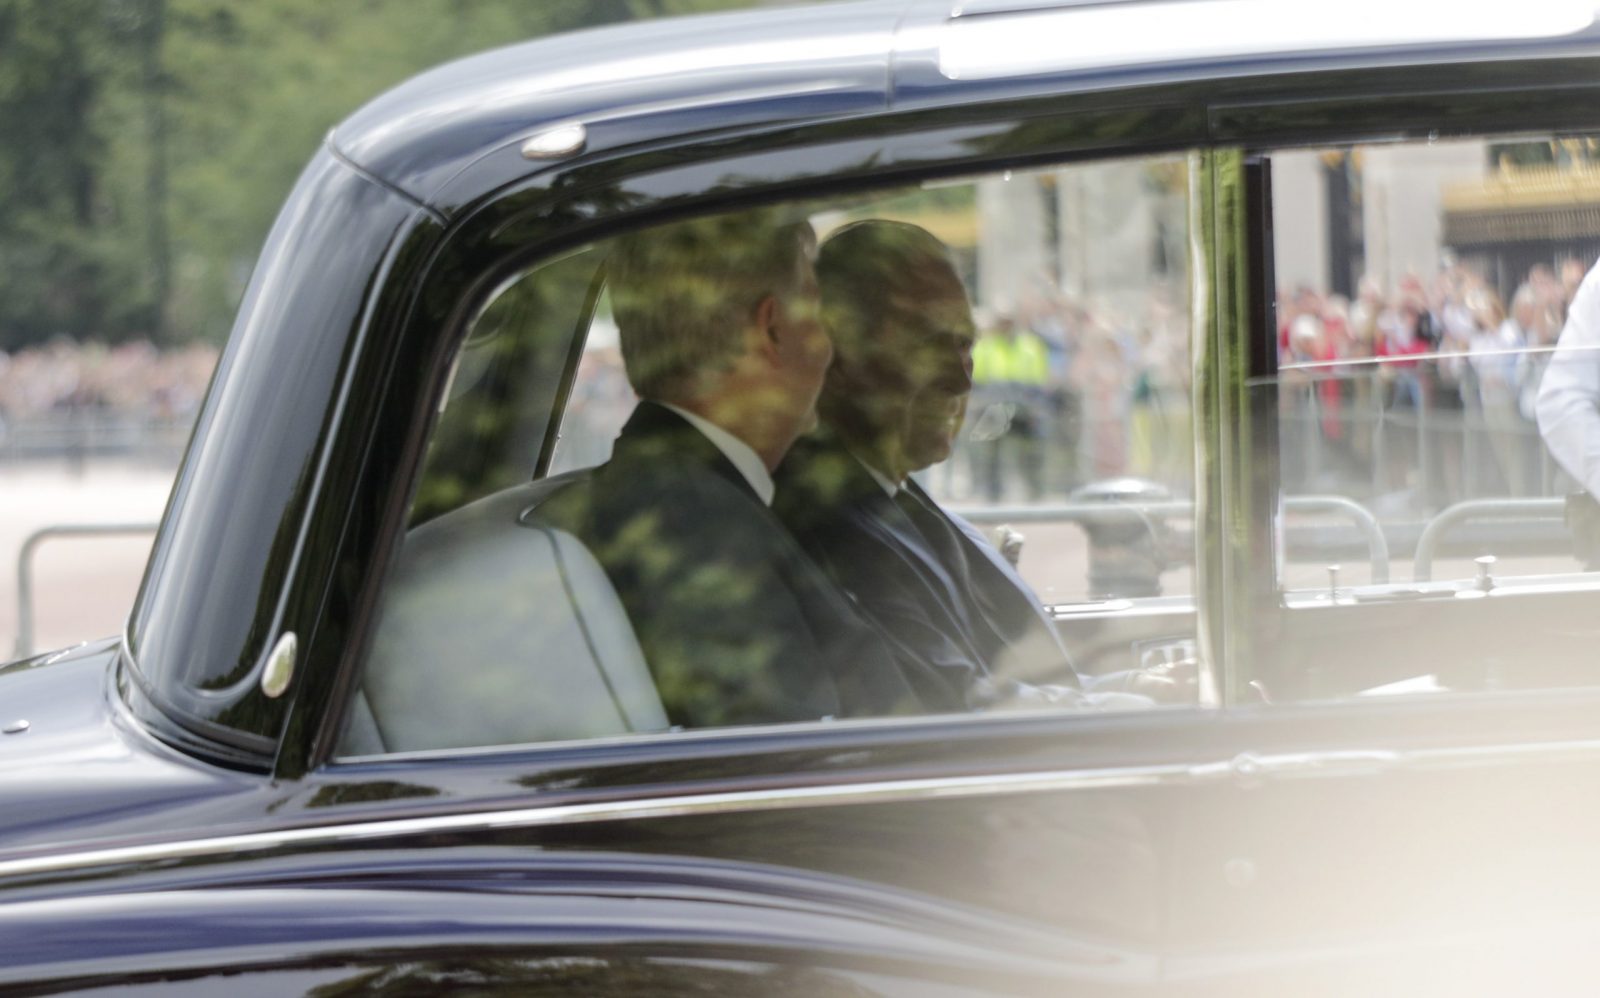 epa10175374 Britain's King Charles III (R) arrives at Buckingham Palace in London, Britain, 10 September 2022. Britain's Queen Elizabeth II died at her Scottish estate, Balmoral Castle, on 08 September 2022. The 96-year-old Queen was the longest-reigning monarch in British history. King Charles III has been formally announced as the new sovereign during a meeting of the Accession Council.  EPA/OLIVIER HOSLET